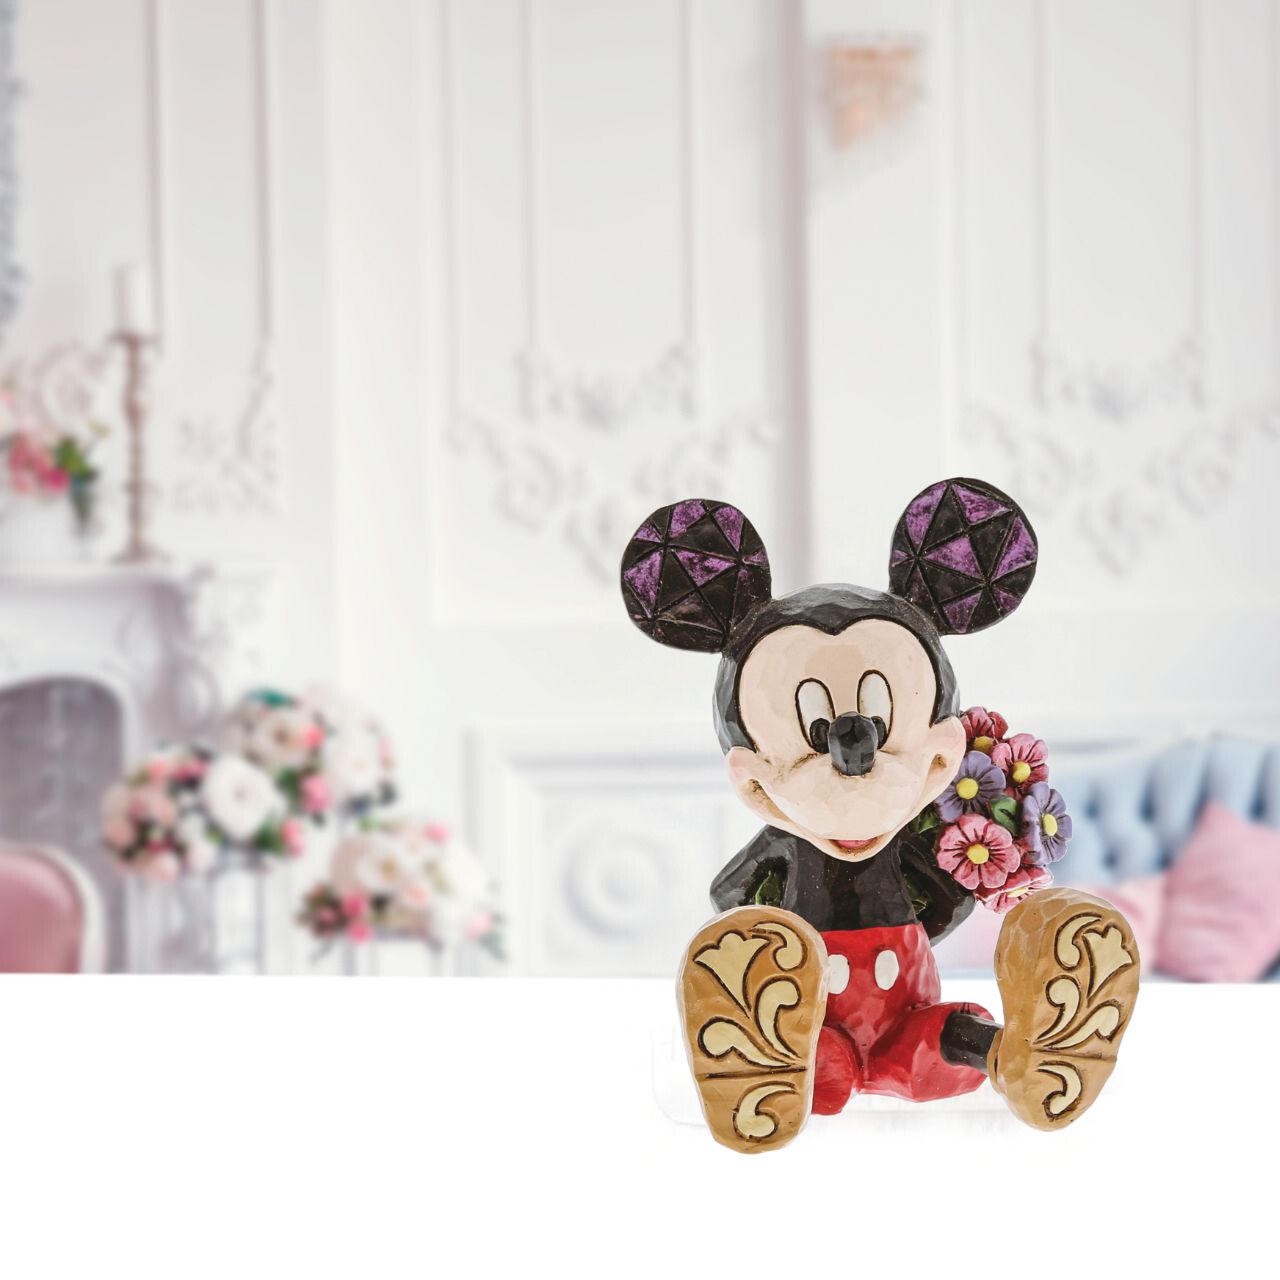 Jim Shore Mickey Mouse with Flowers Mini Figurine – Horgan's of Blarney